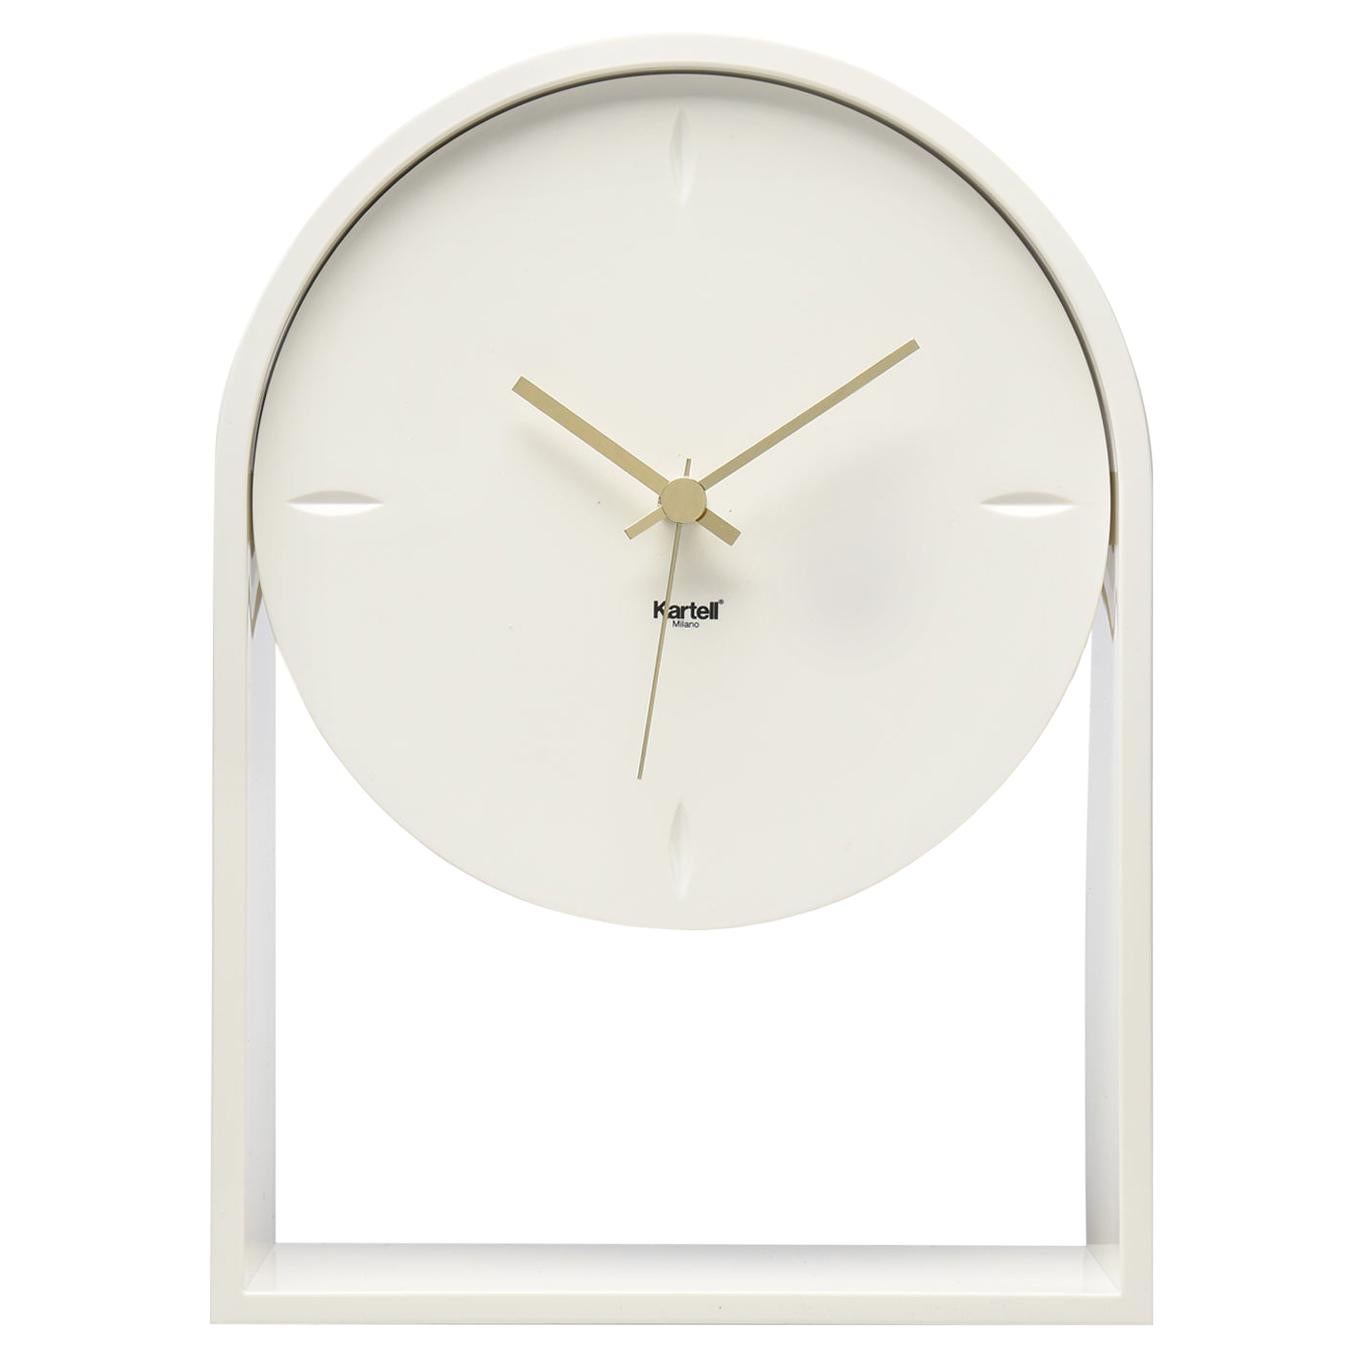 Kartell Air du Temps Table Clock in White by Eugeni Quitllet